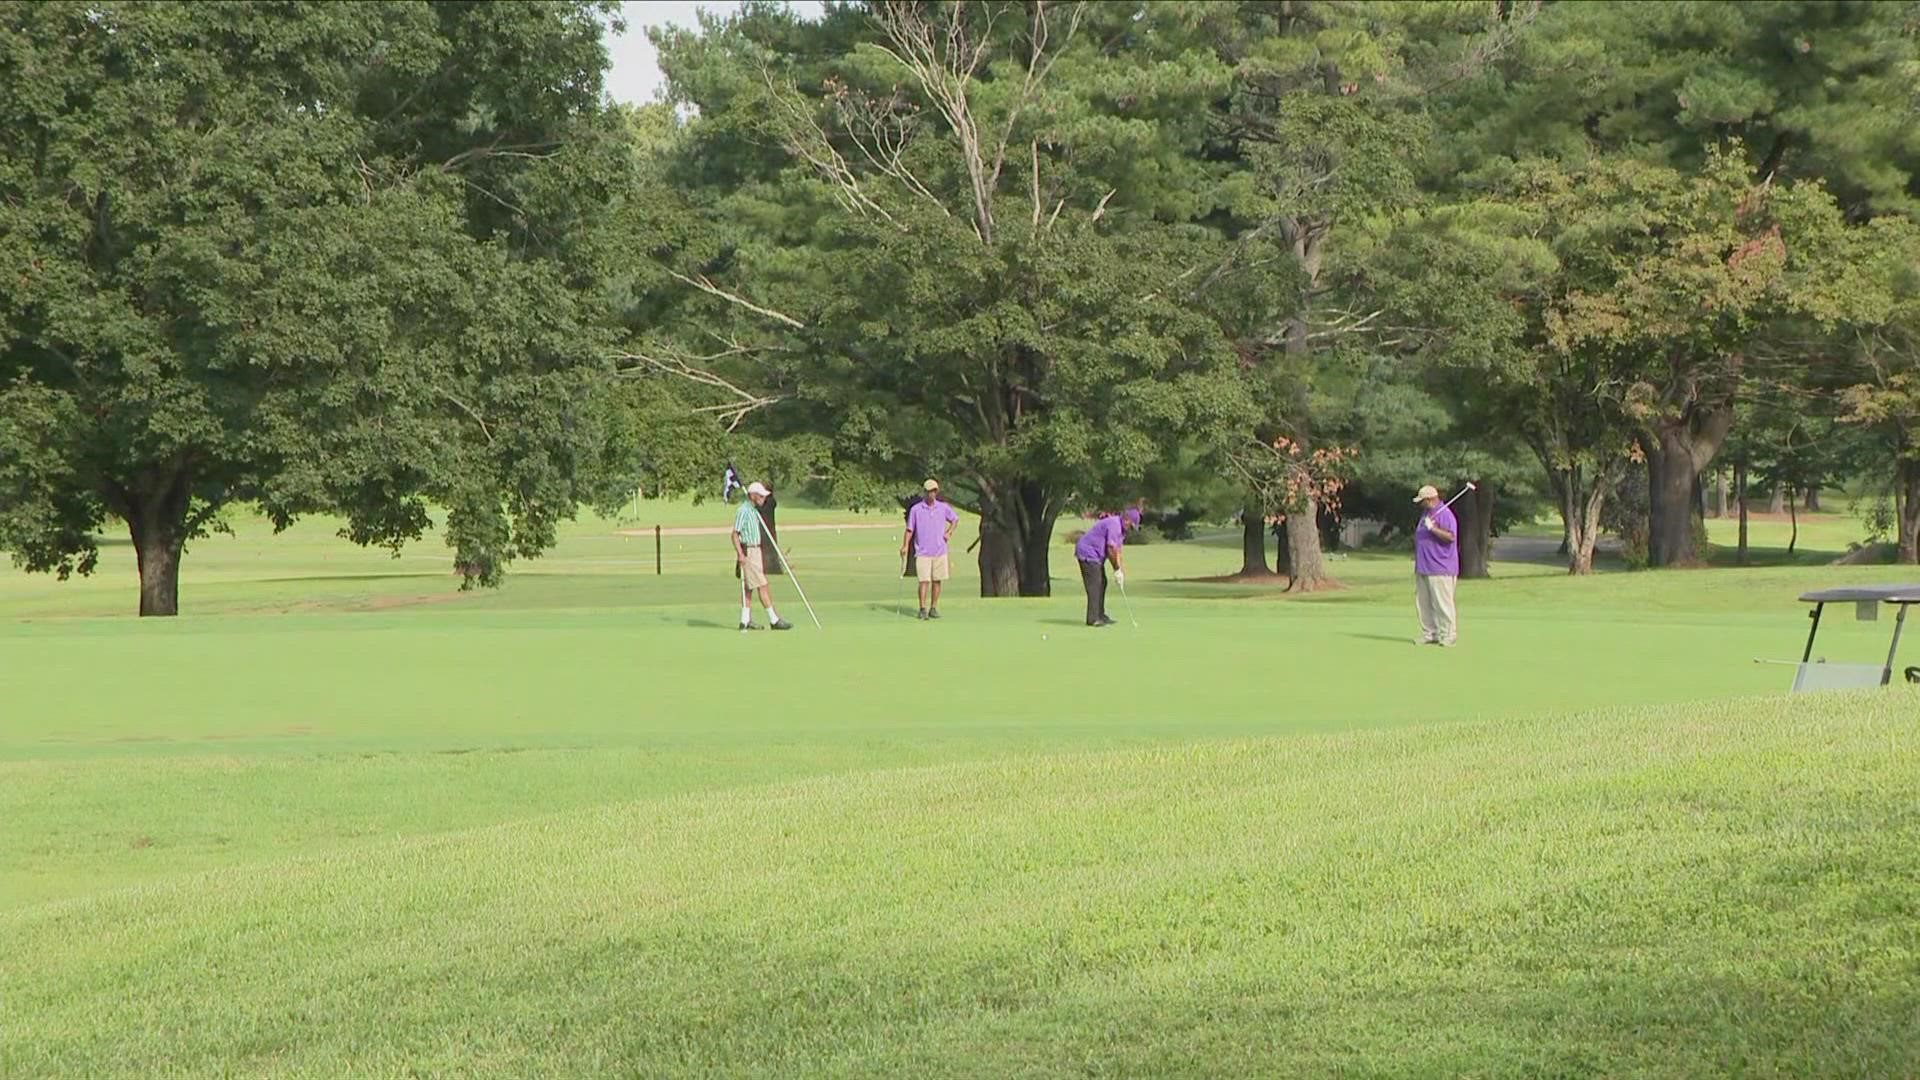 Enterprise Golf Course is back open for play after a three-month shutdown.